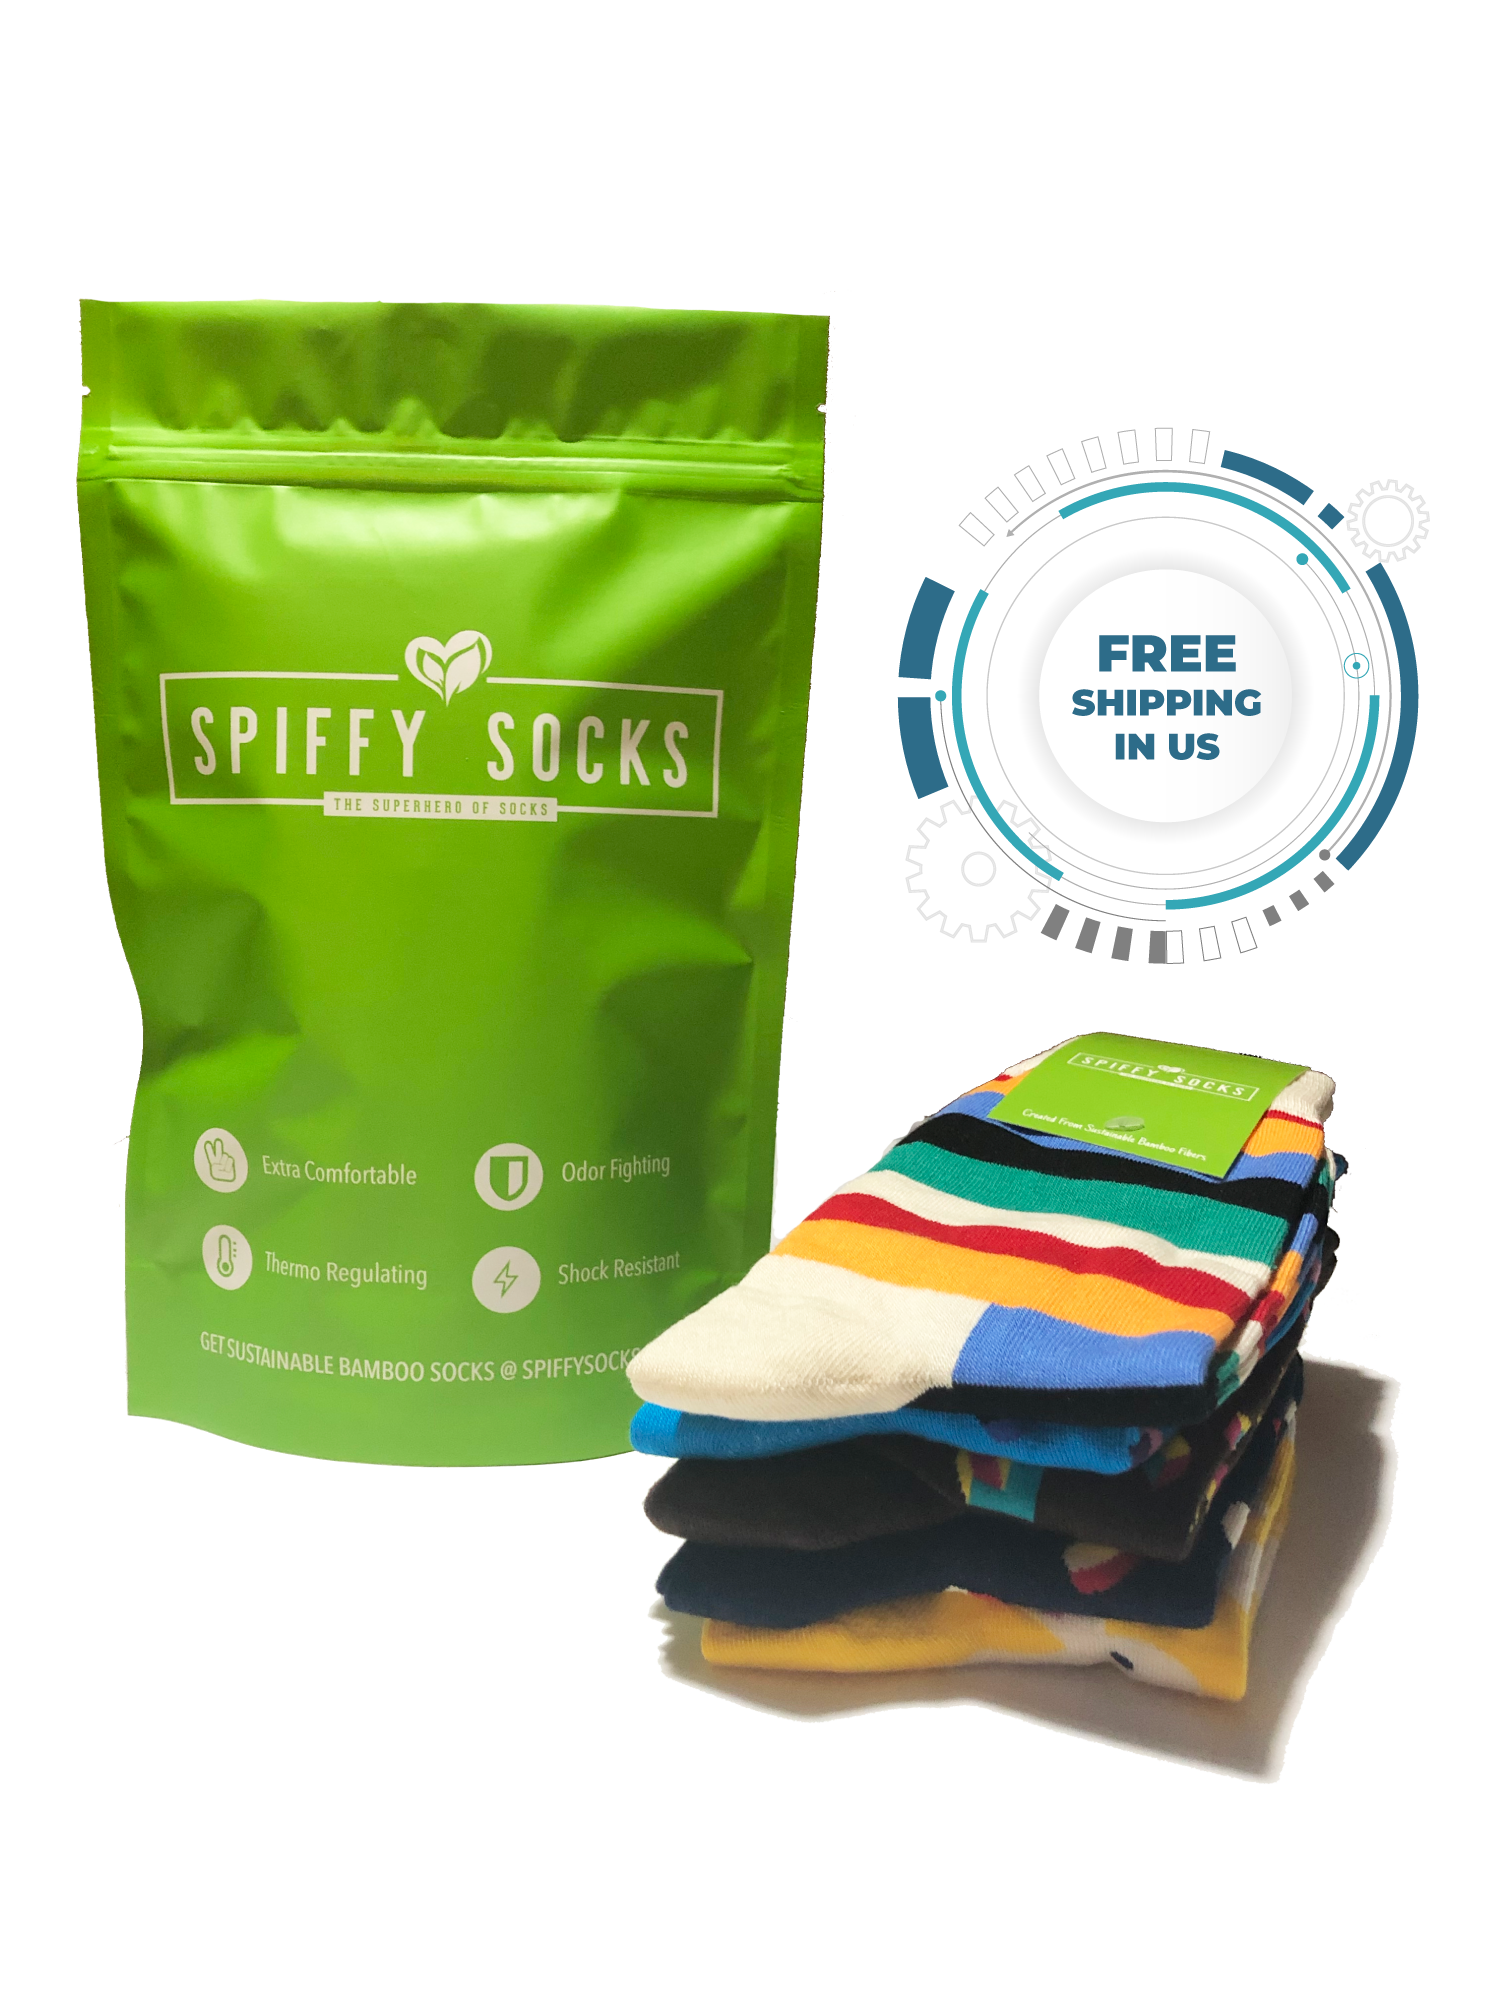 Spiffy Socks Holiday 2022 Deal: Get your first Box Free